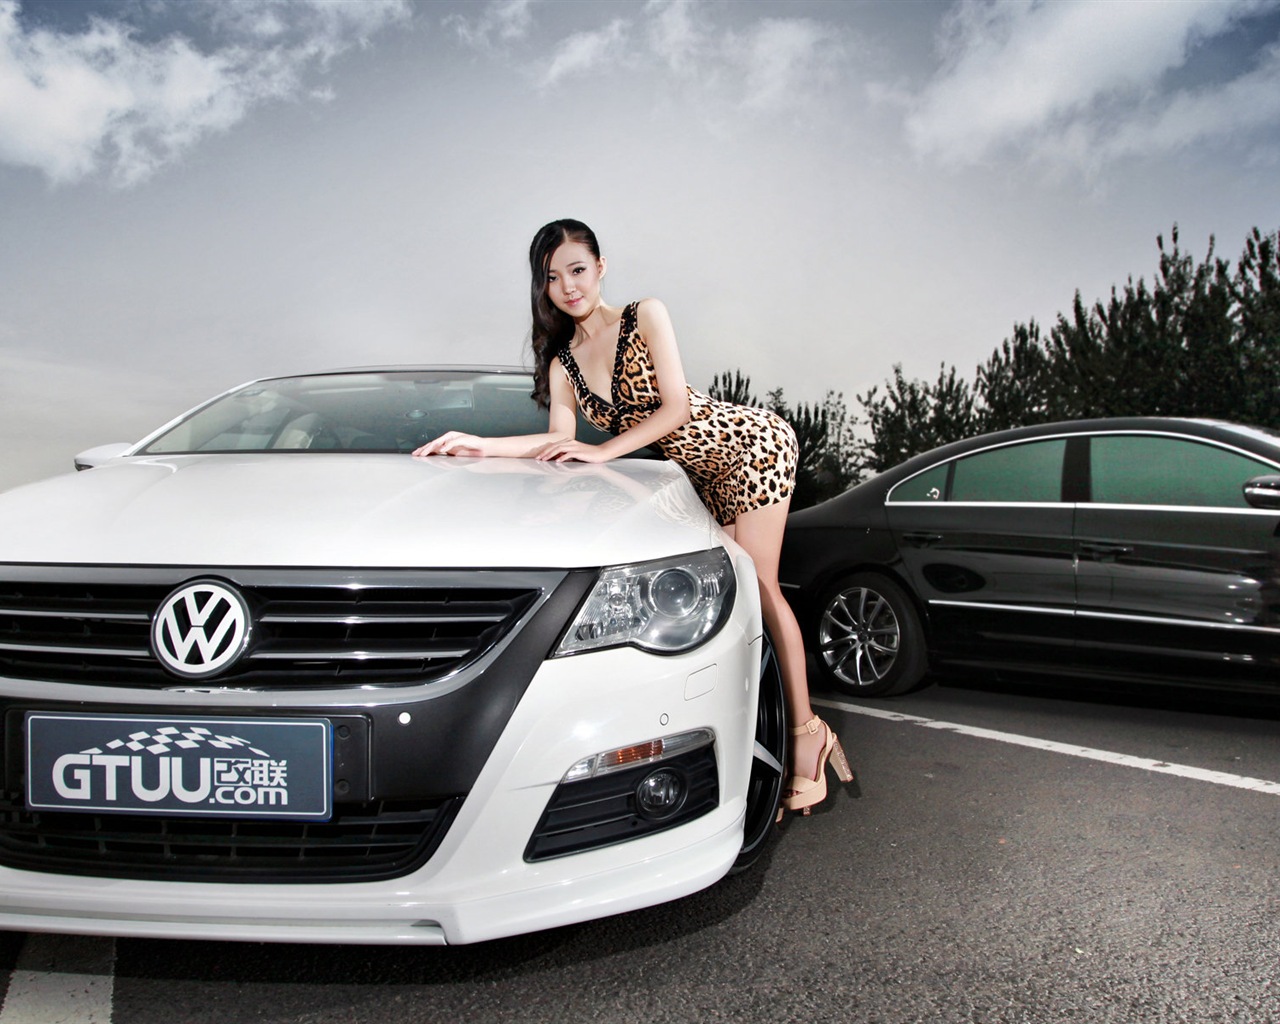 Beautiful leopard dress girl with Volkswagen sports car wallpapers #10 - 1280x1024